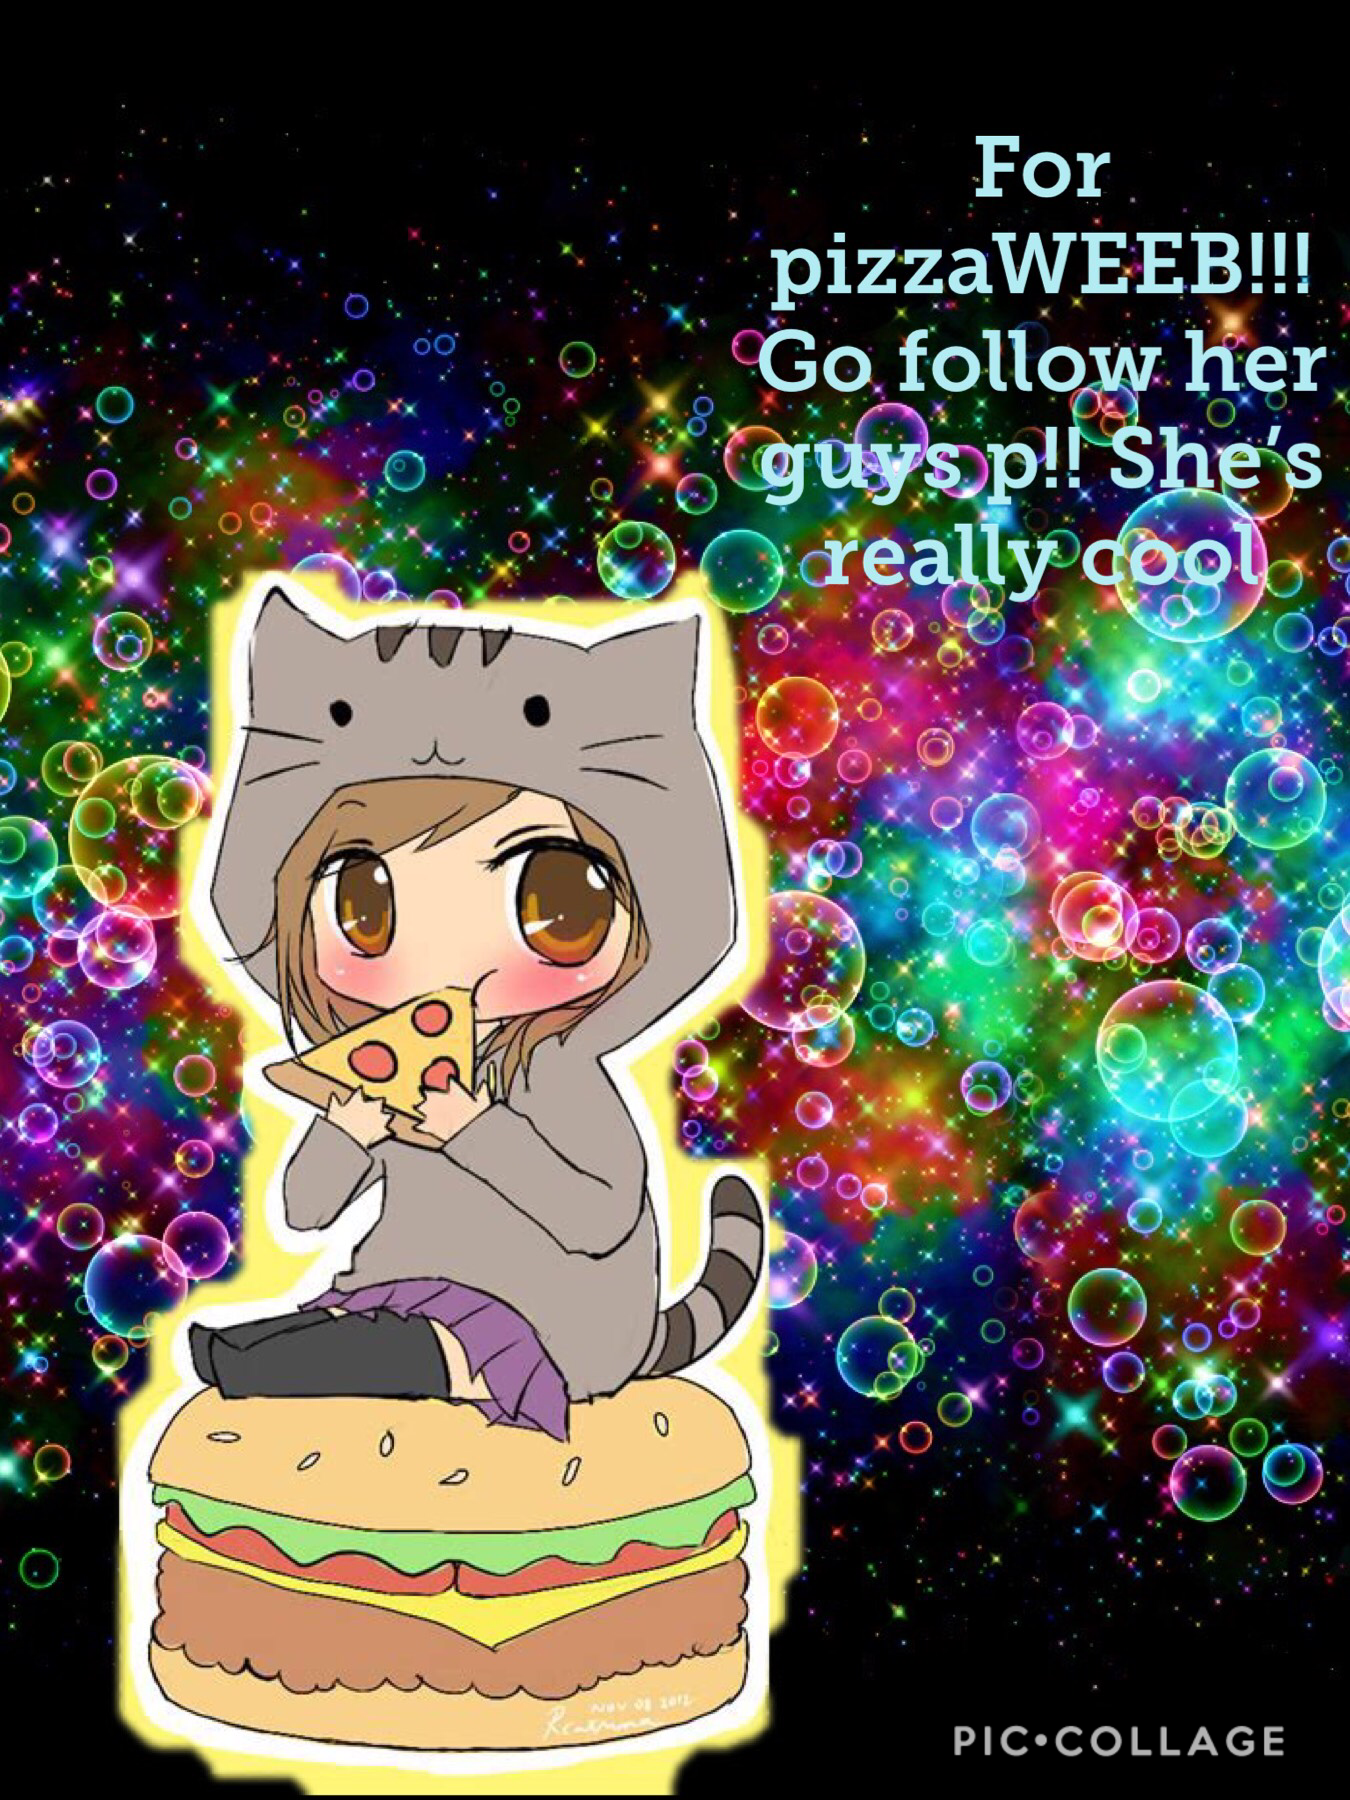 Go follow pizzaWEEB, she’s rlly cool and check out her content, guys